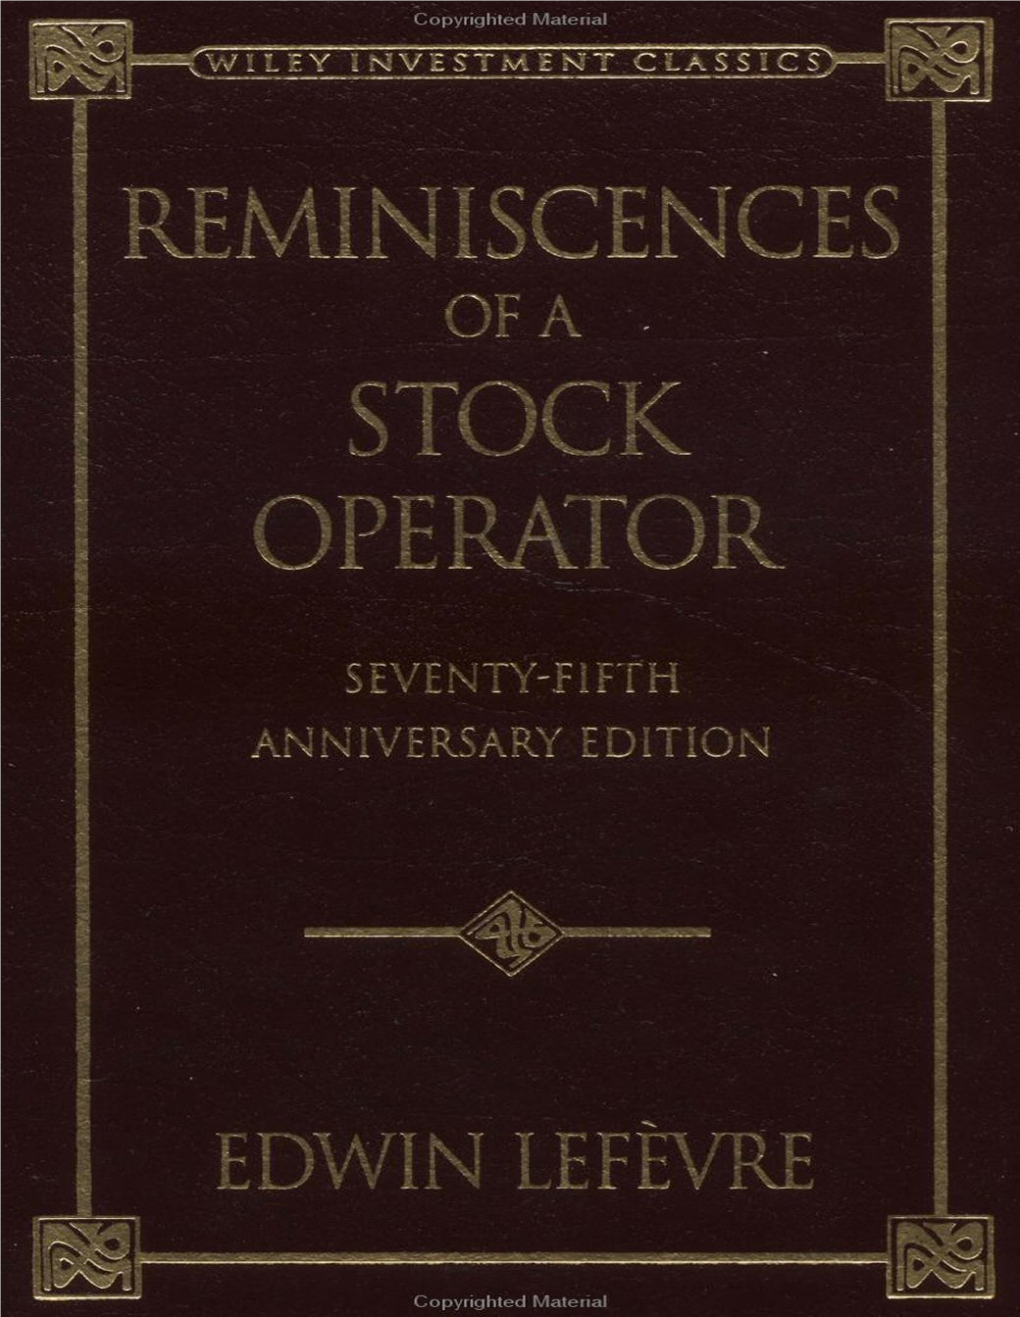 REMINISCENCES of a STOCK OPERATOR by Edwin Lefevre the Sun Dial Press, Inc